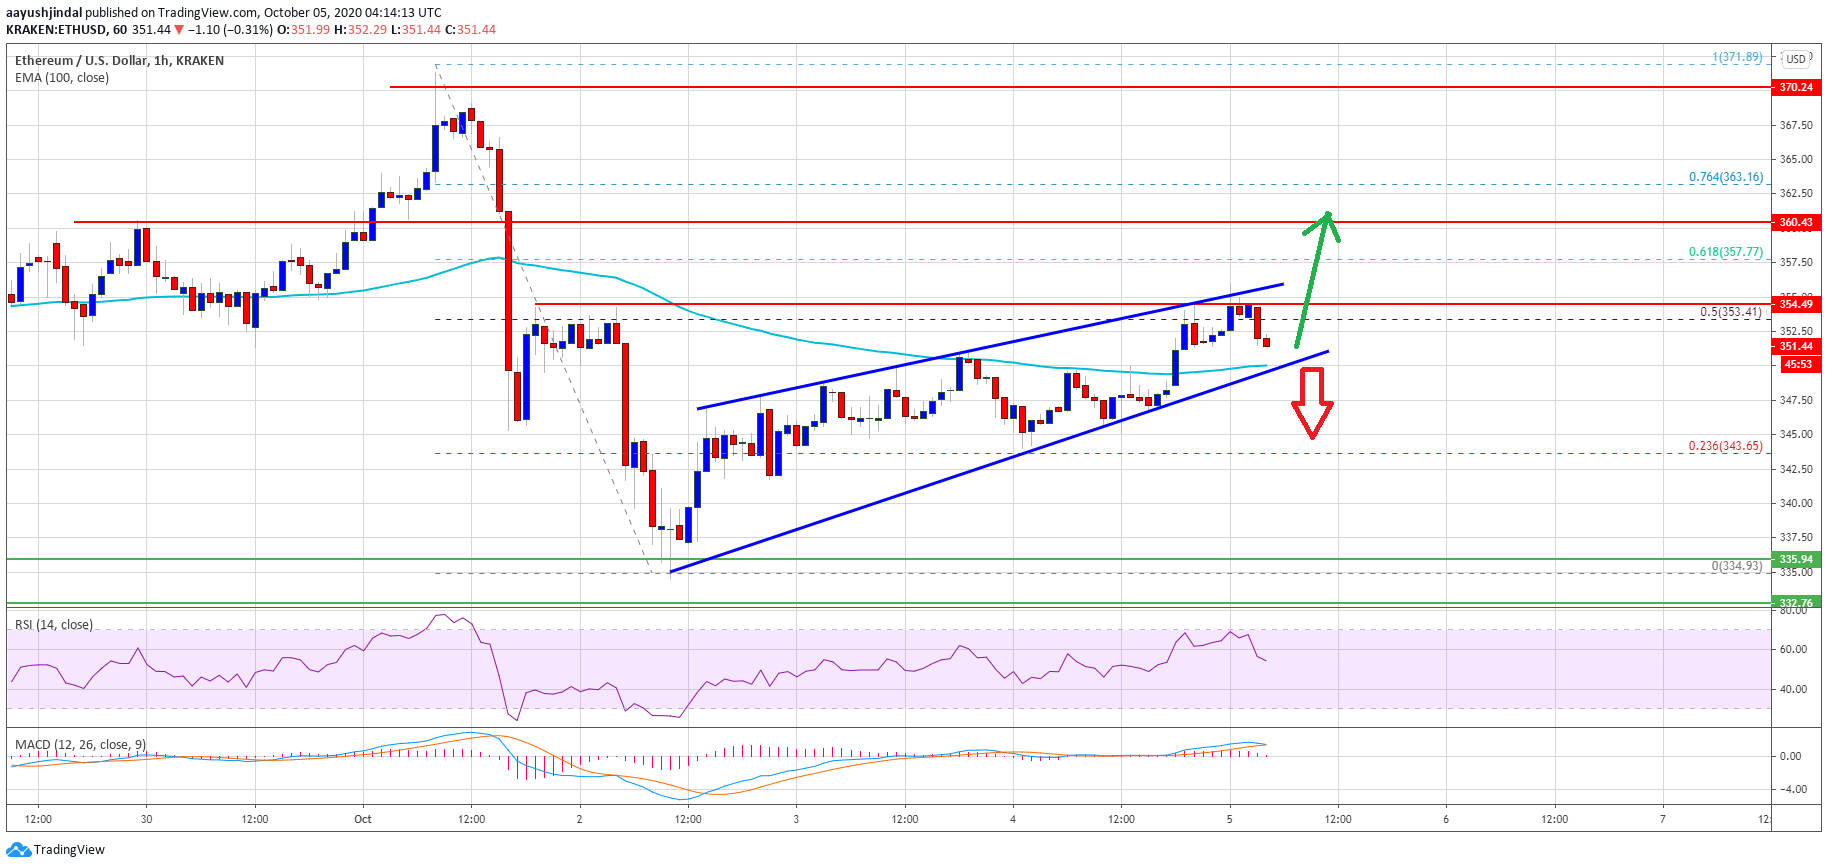 Ethereum Reaches Crucial Resistance: Technicals Hint A 5% pullback is Likely